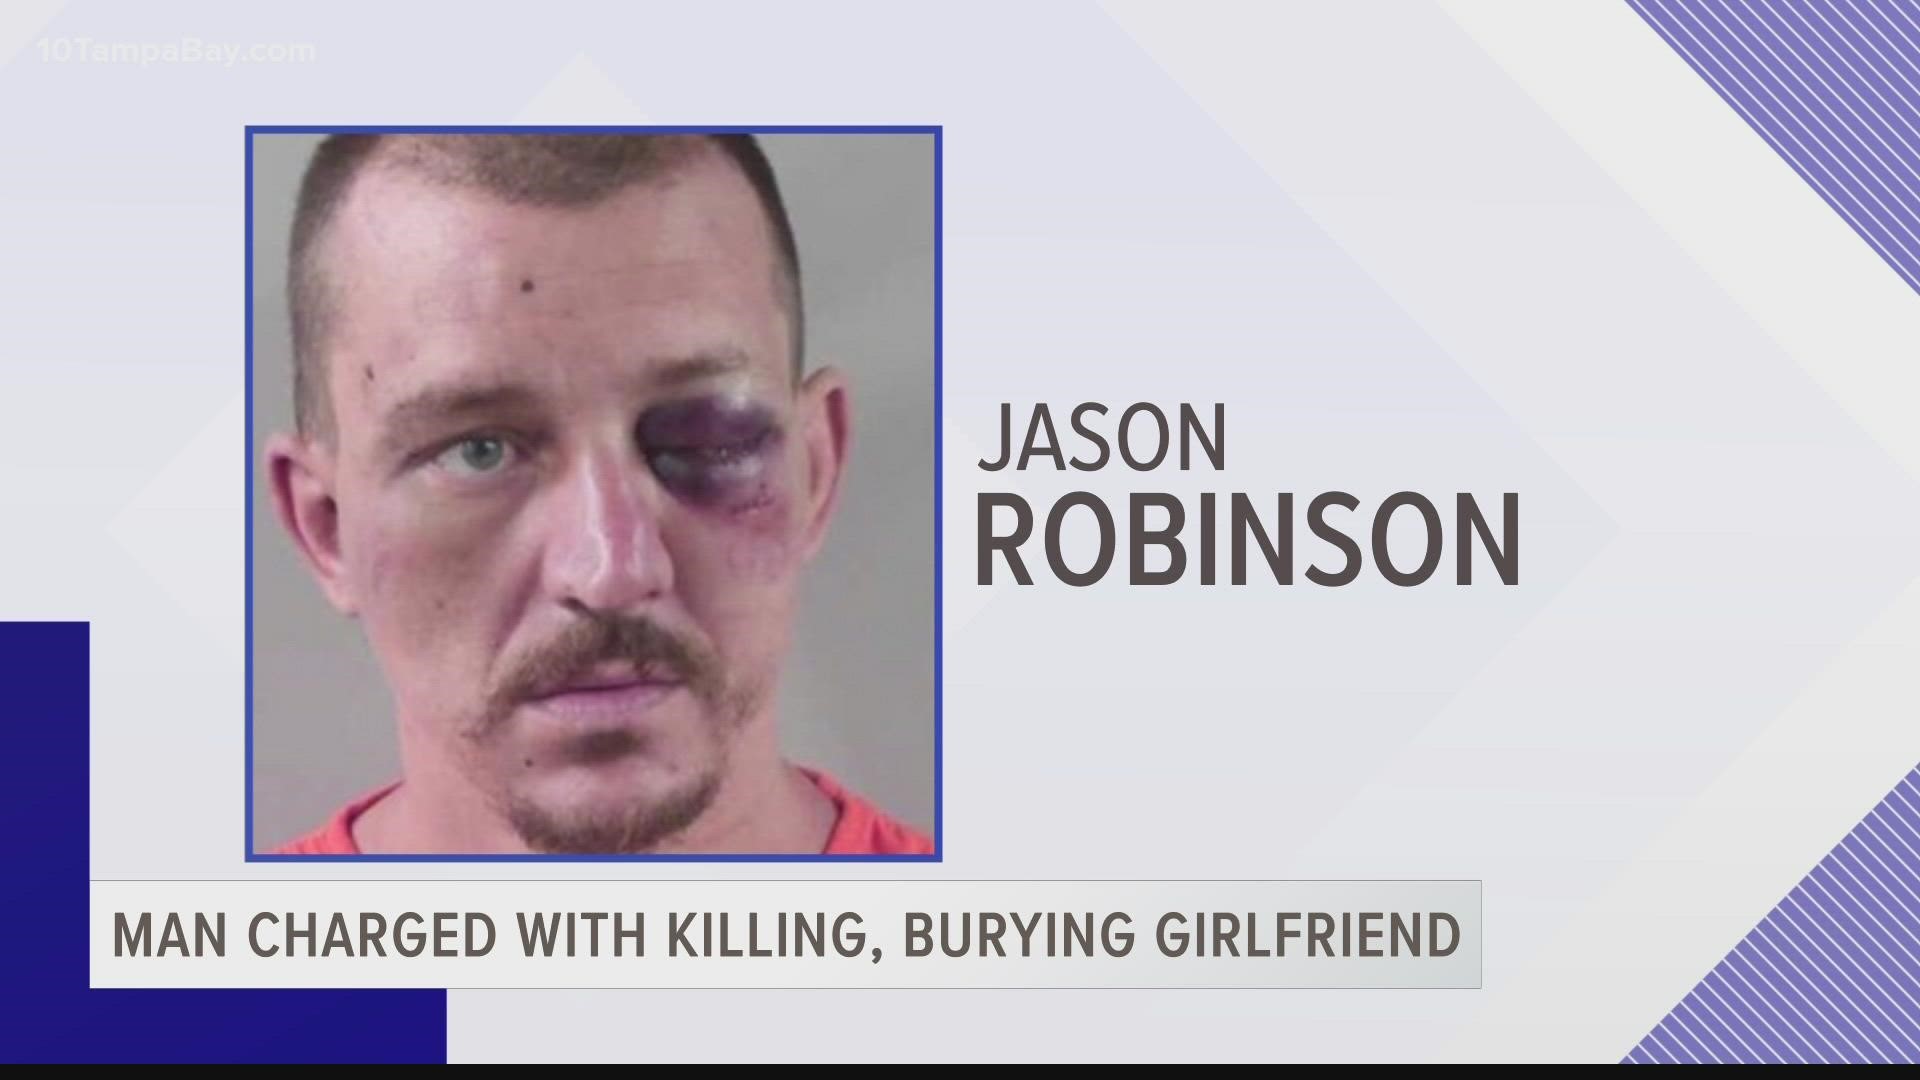 The sheriff's office says Jason Robinson "violently" attacked a responding deputy. Others who saw the struggle stepped in to help.